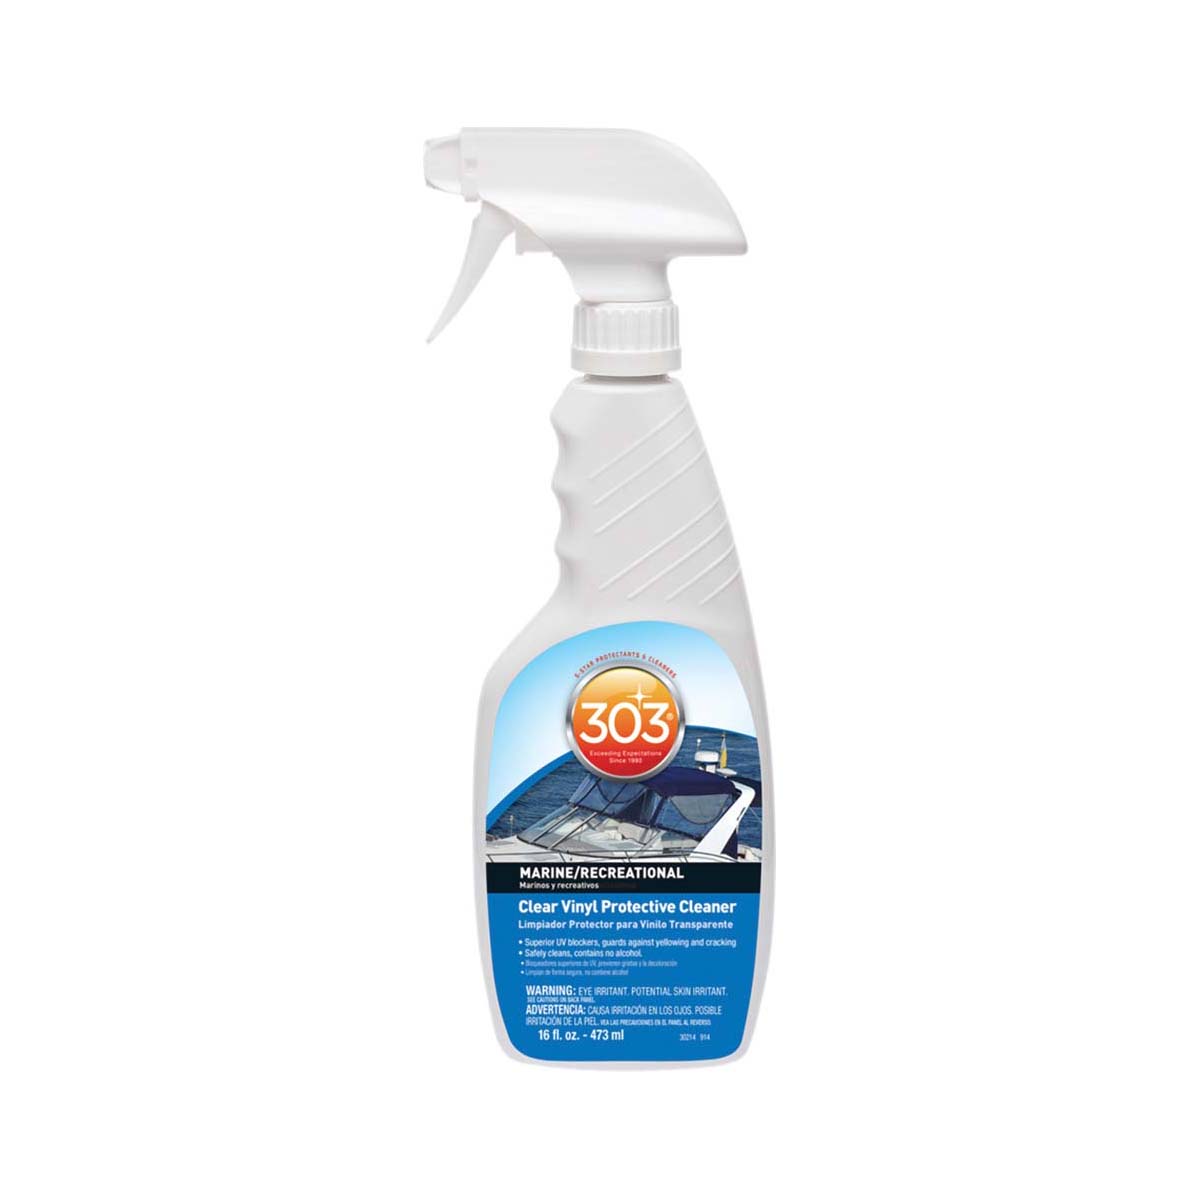 303 Marine Clear Vinyl Protective Cleaner 946ml